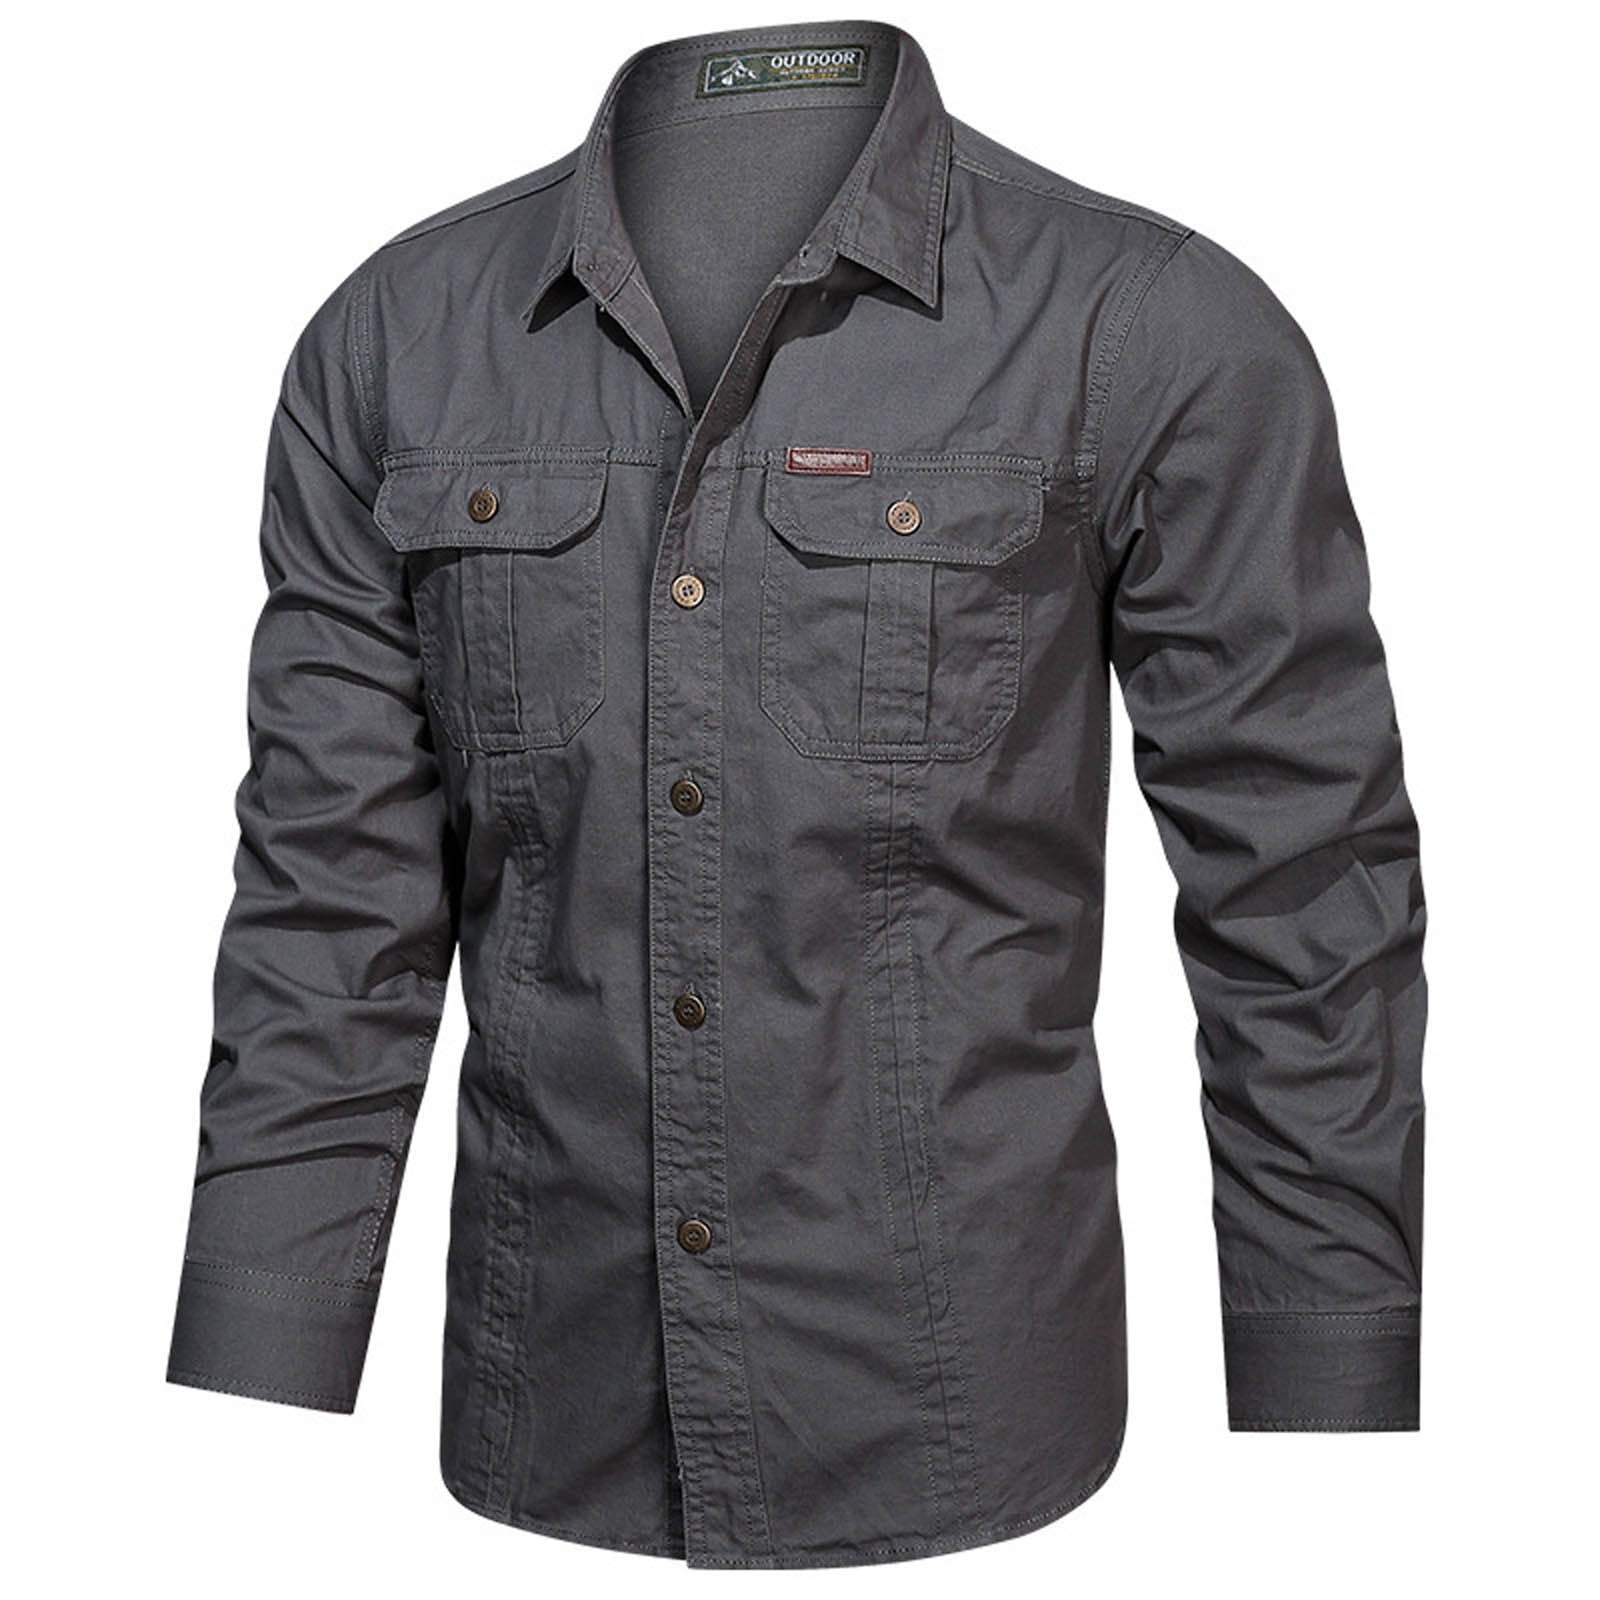 Men's Tactical Cargo Work Shirts Military Casual Button Up Slim